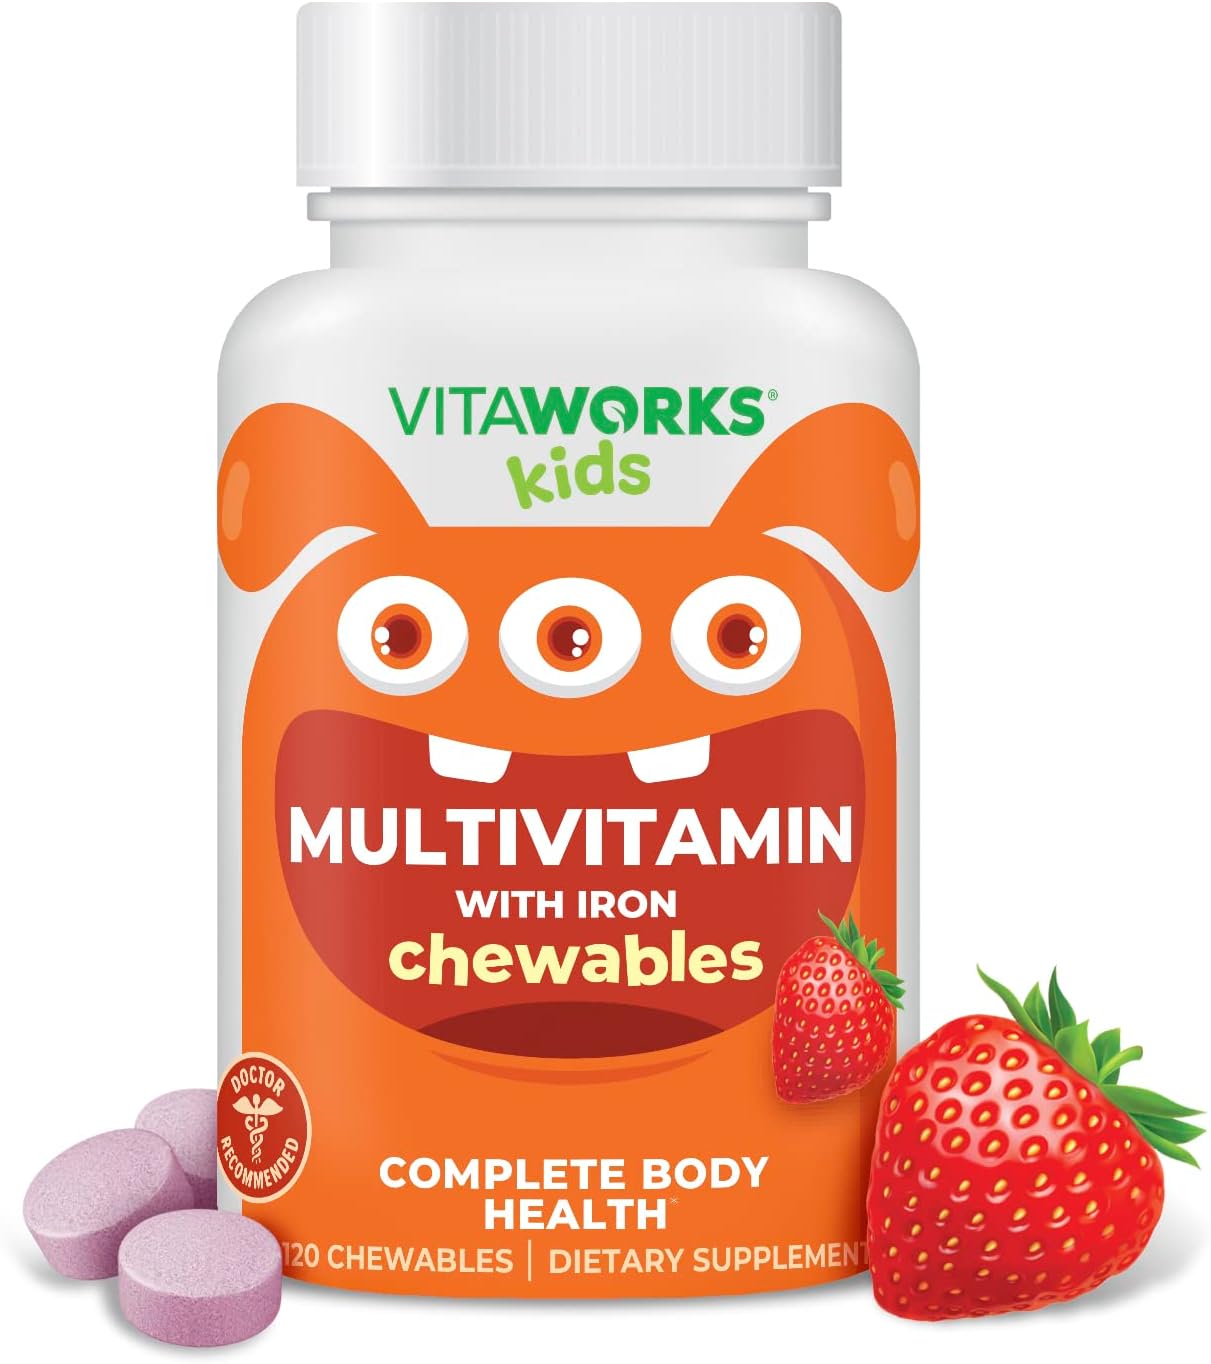 VitaWorks Kids Multivitamin with Iron  Minerals Chewable Tablets - Mixed Fruit Flavor - Vegetarian, GMO-Free, Nut Free - Dietary Supplement - Digestive Support for Children - 120 Chewables,